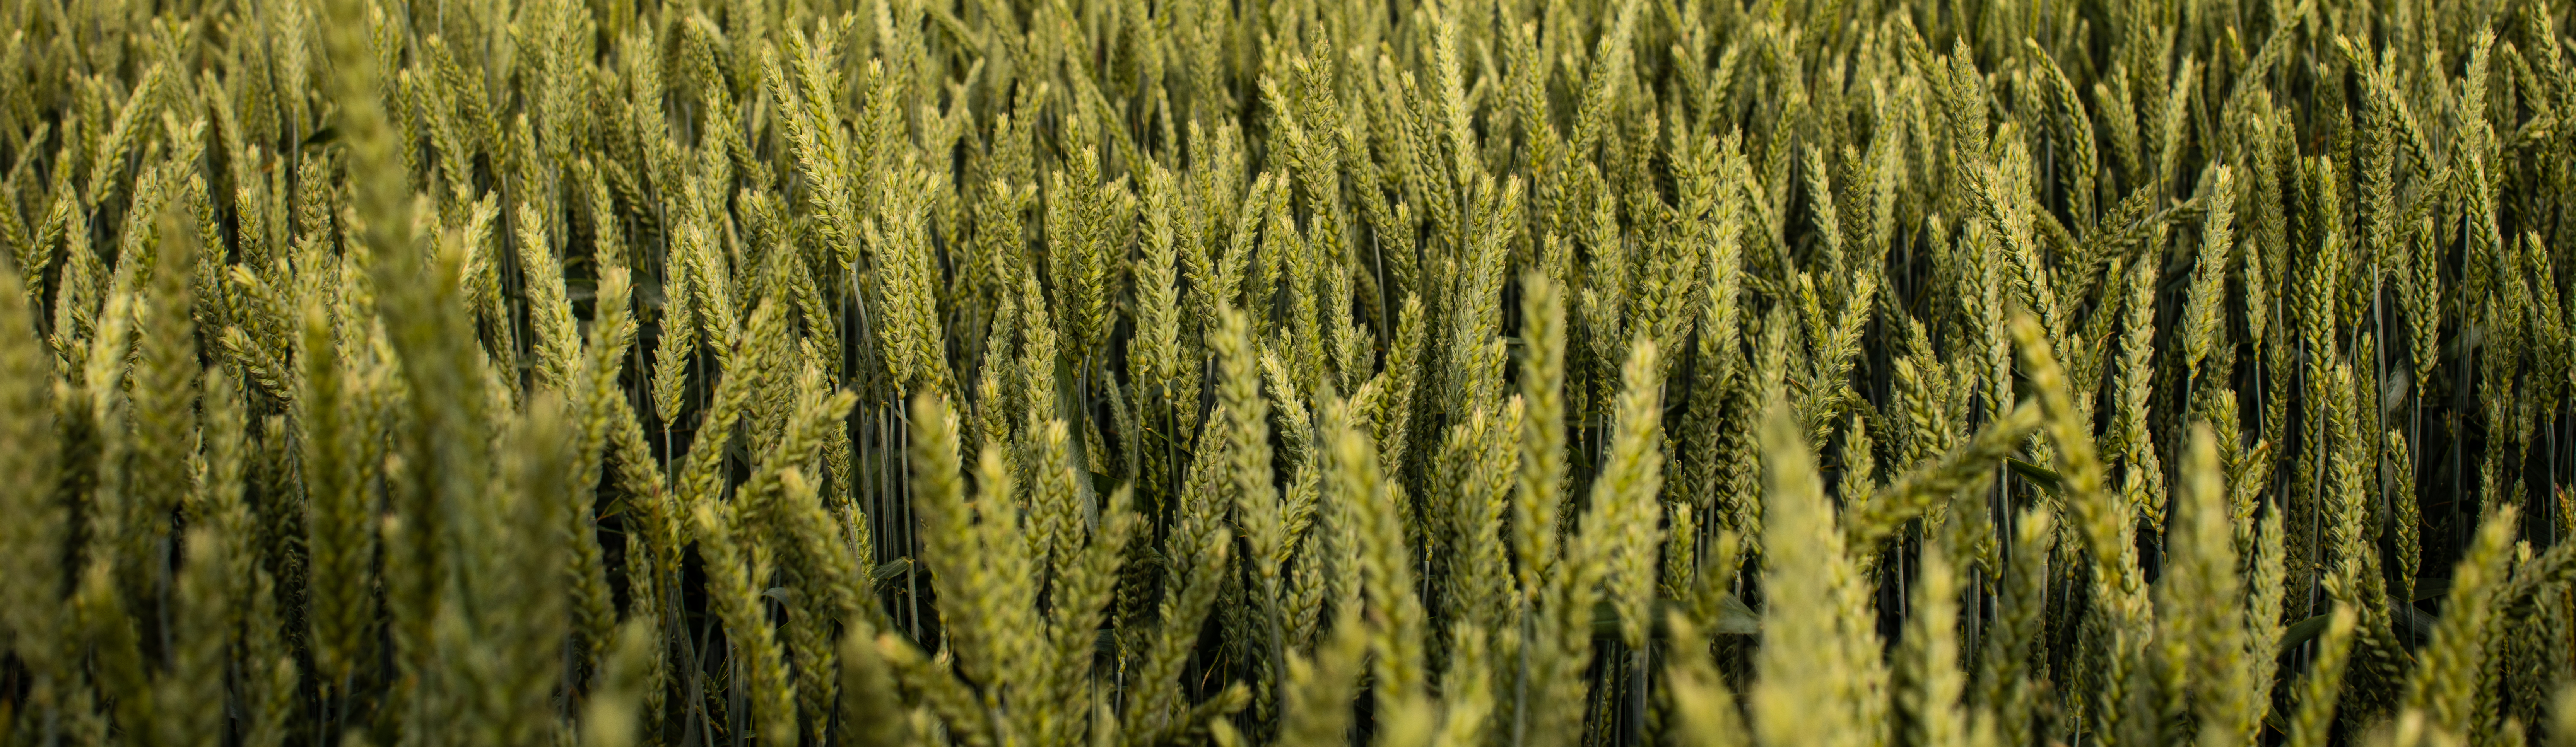 Sowing Wheat - seed rates, sowing date and soil preparation. wheat price uk